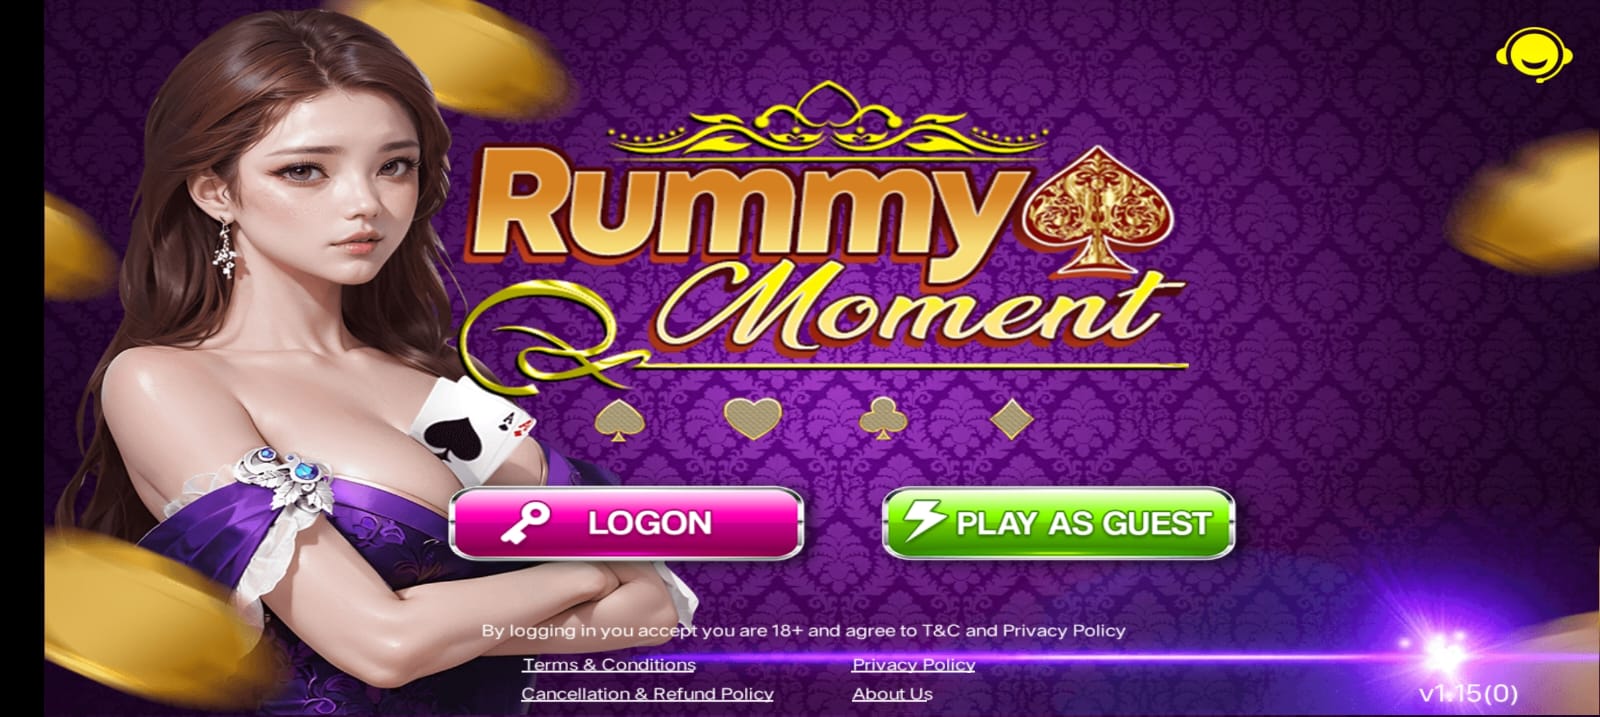 Moment Rummy Application,rummy moment,rummy moment app,rummy moment apk,rummy moment app link,rummy moment payment proof,new rummy app,rummy moment app download,rummy moment withdrawal proof,rummy moment tricks,rummy moment apk link,moment rummy,new rummy app today,rummy moment link,rummy moment 51 bonus,rummy moment game link,rummy moment 2023,rummy moment withdrawal problem,rummy moment withdrawal,rummy moment winning trick,rummy moment winning tricks,moment rummy app ,teen patti 2024,new teen patti 2024